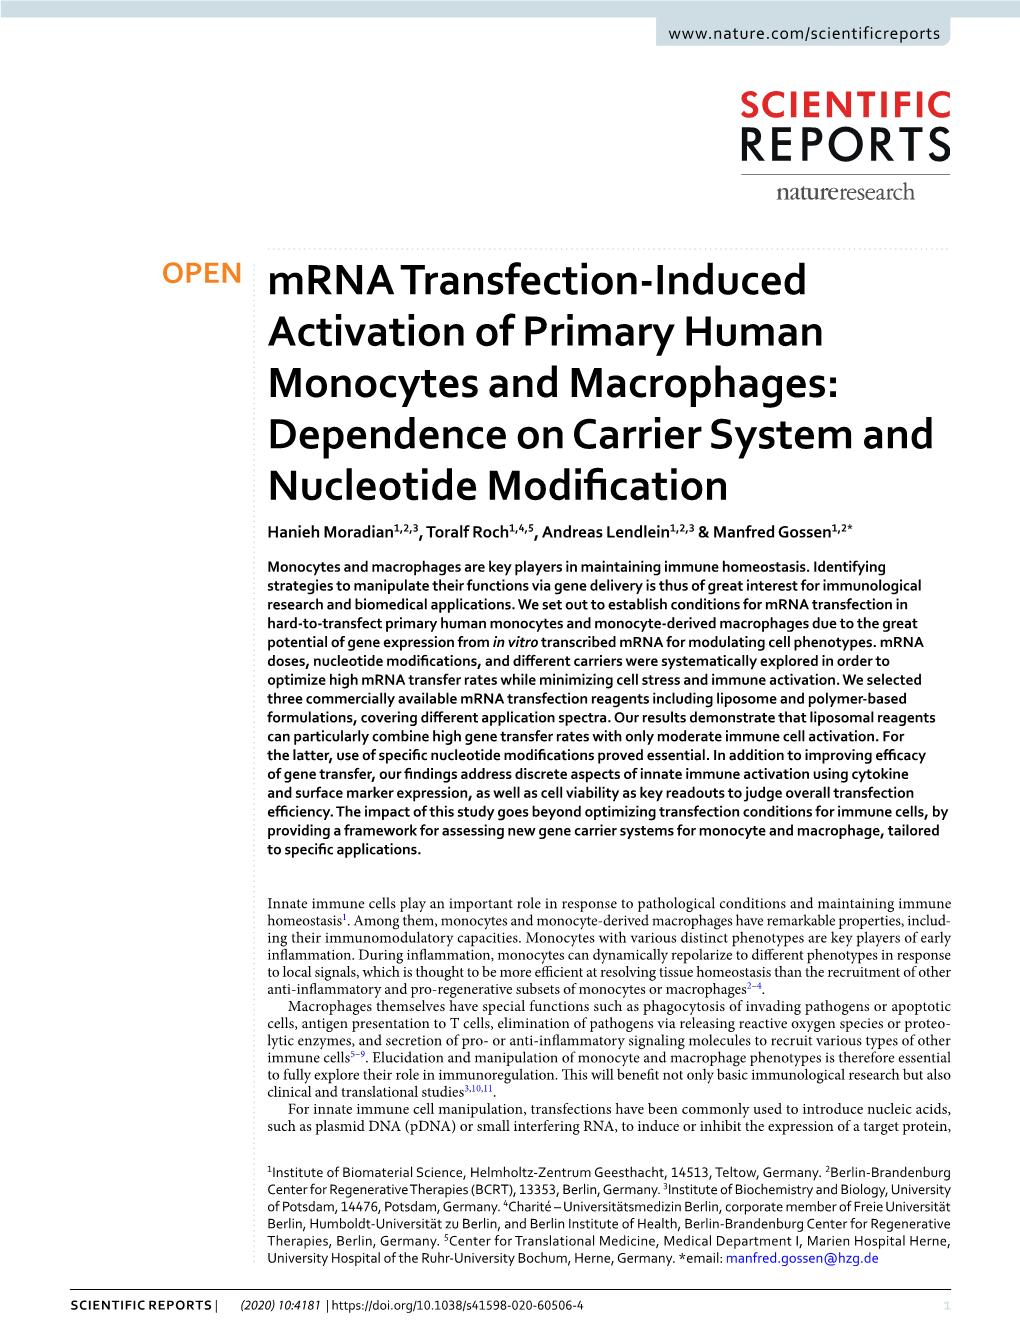 Mrna Transfection-Induced Activation of Primary Human Monocytes And